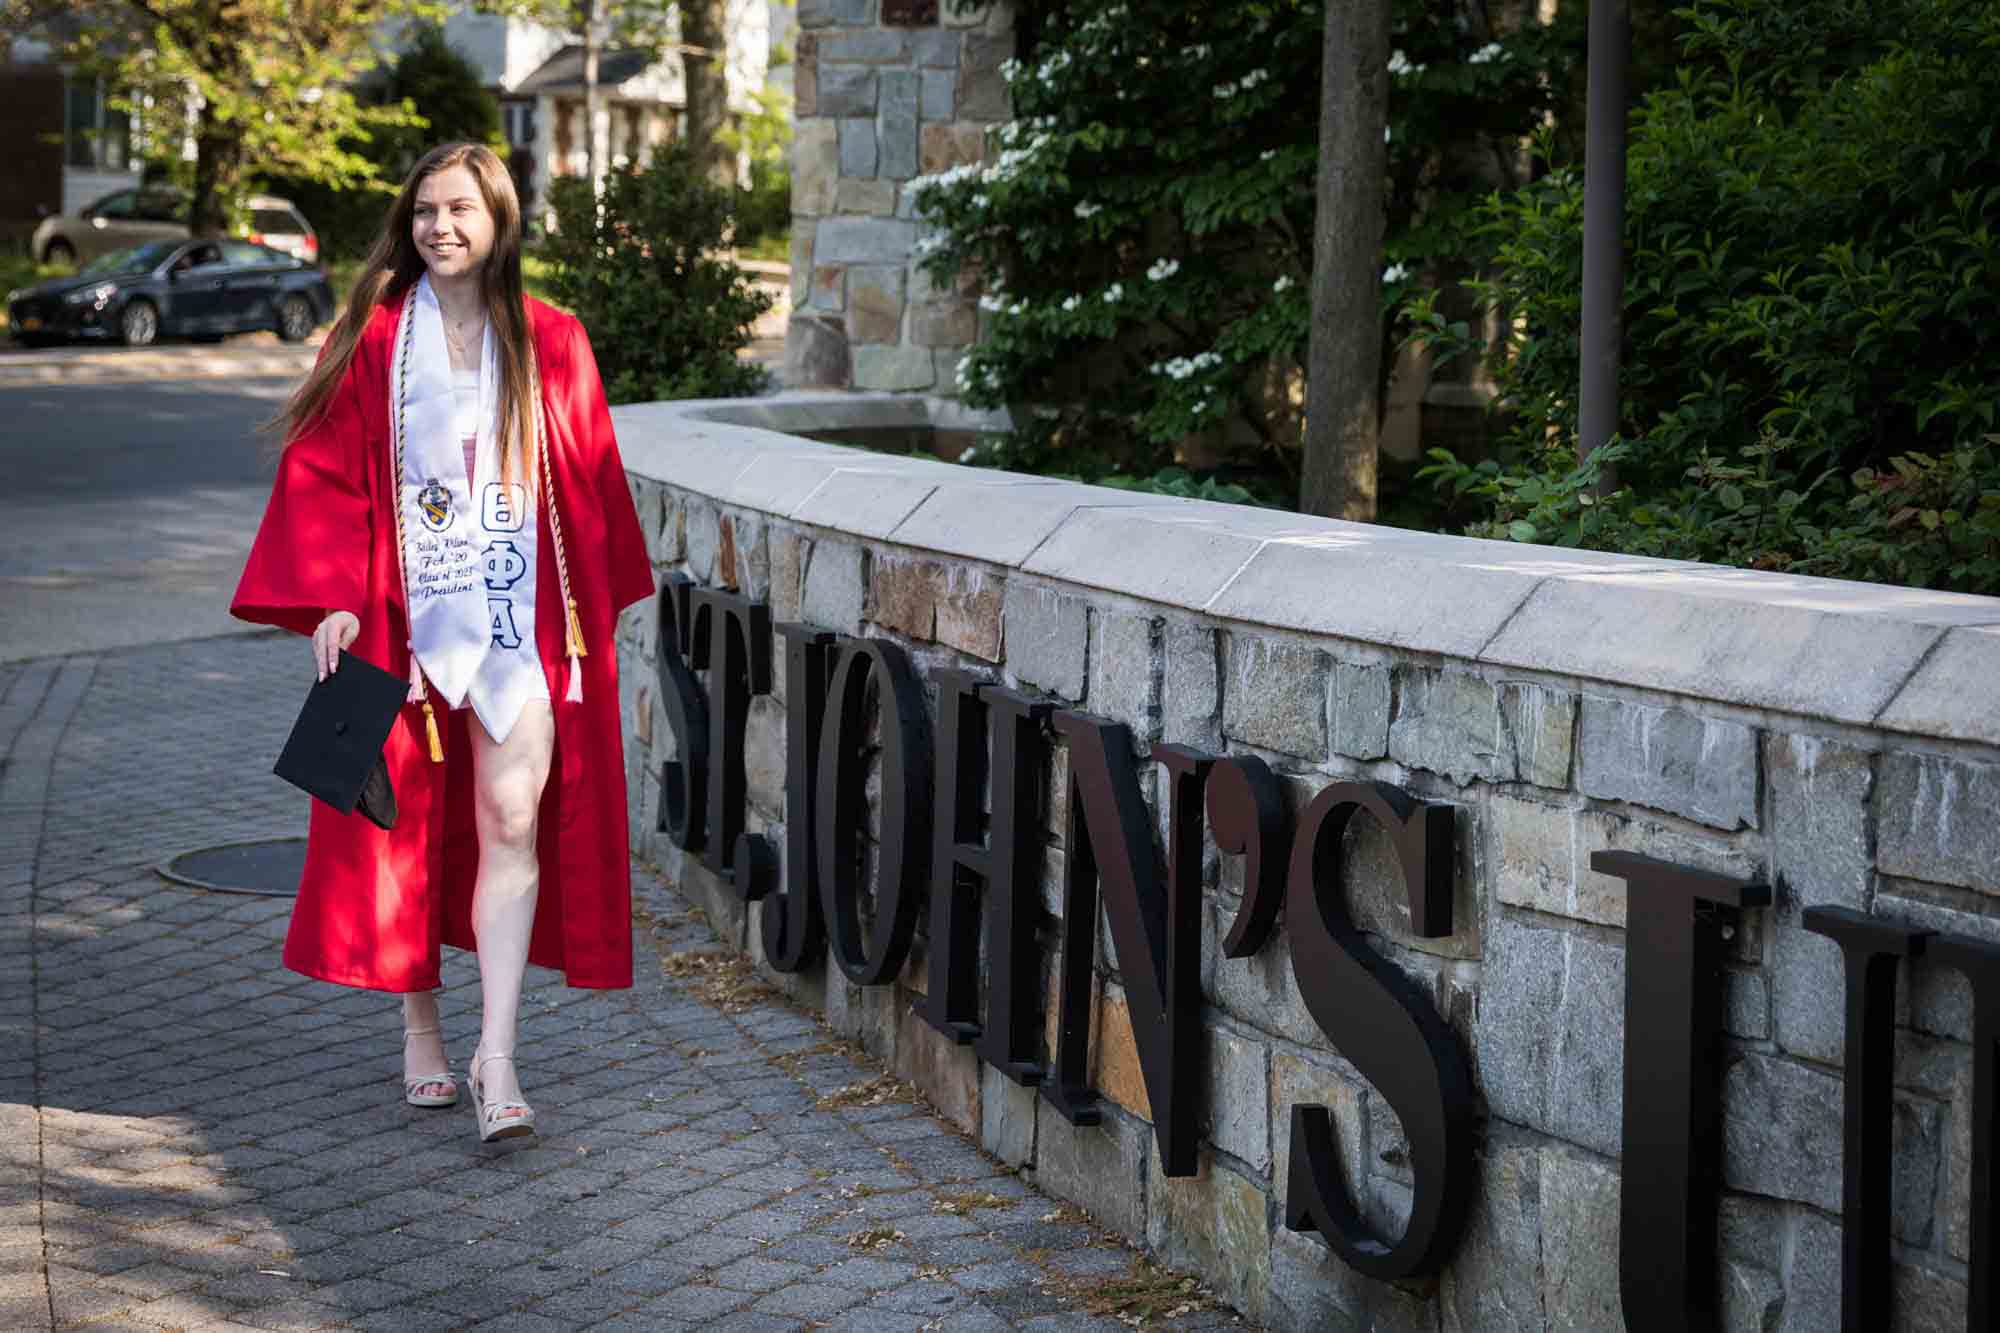 Female graduate wearing red robe and holding cap walking in front of university sign for an article on graduation portrait photo tips